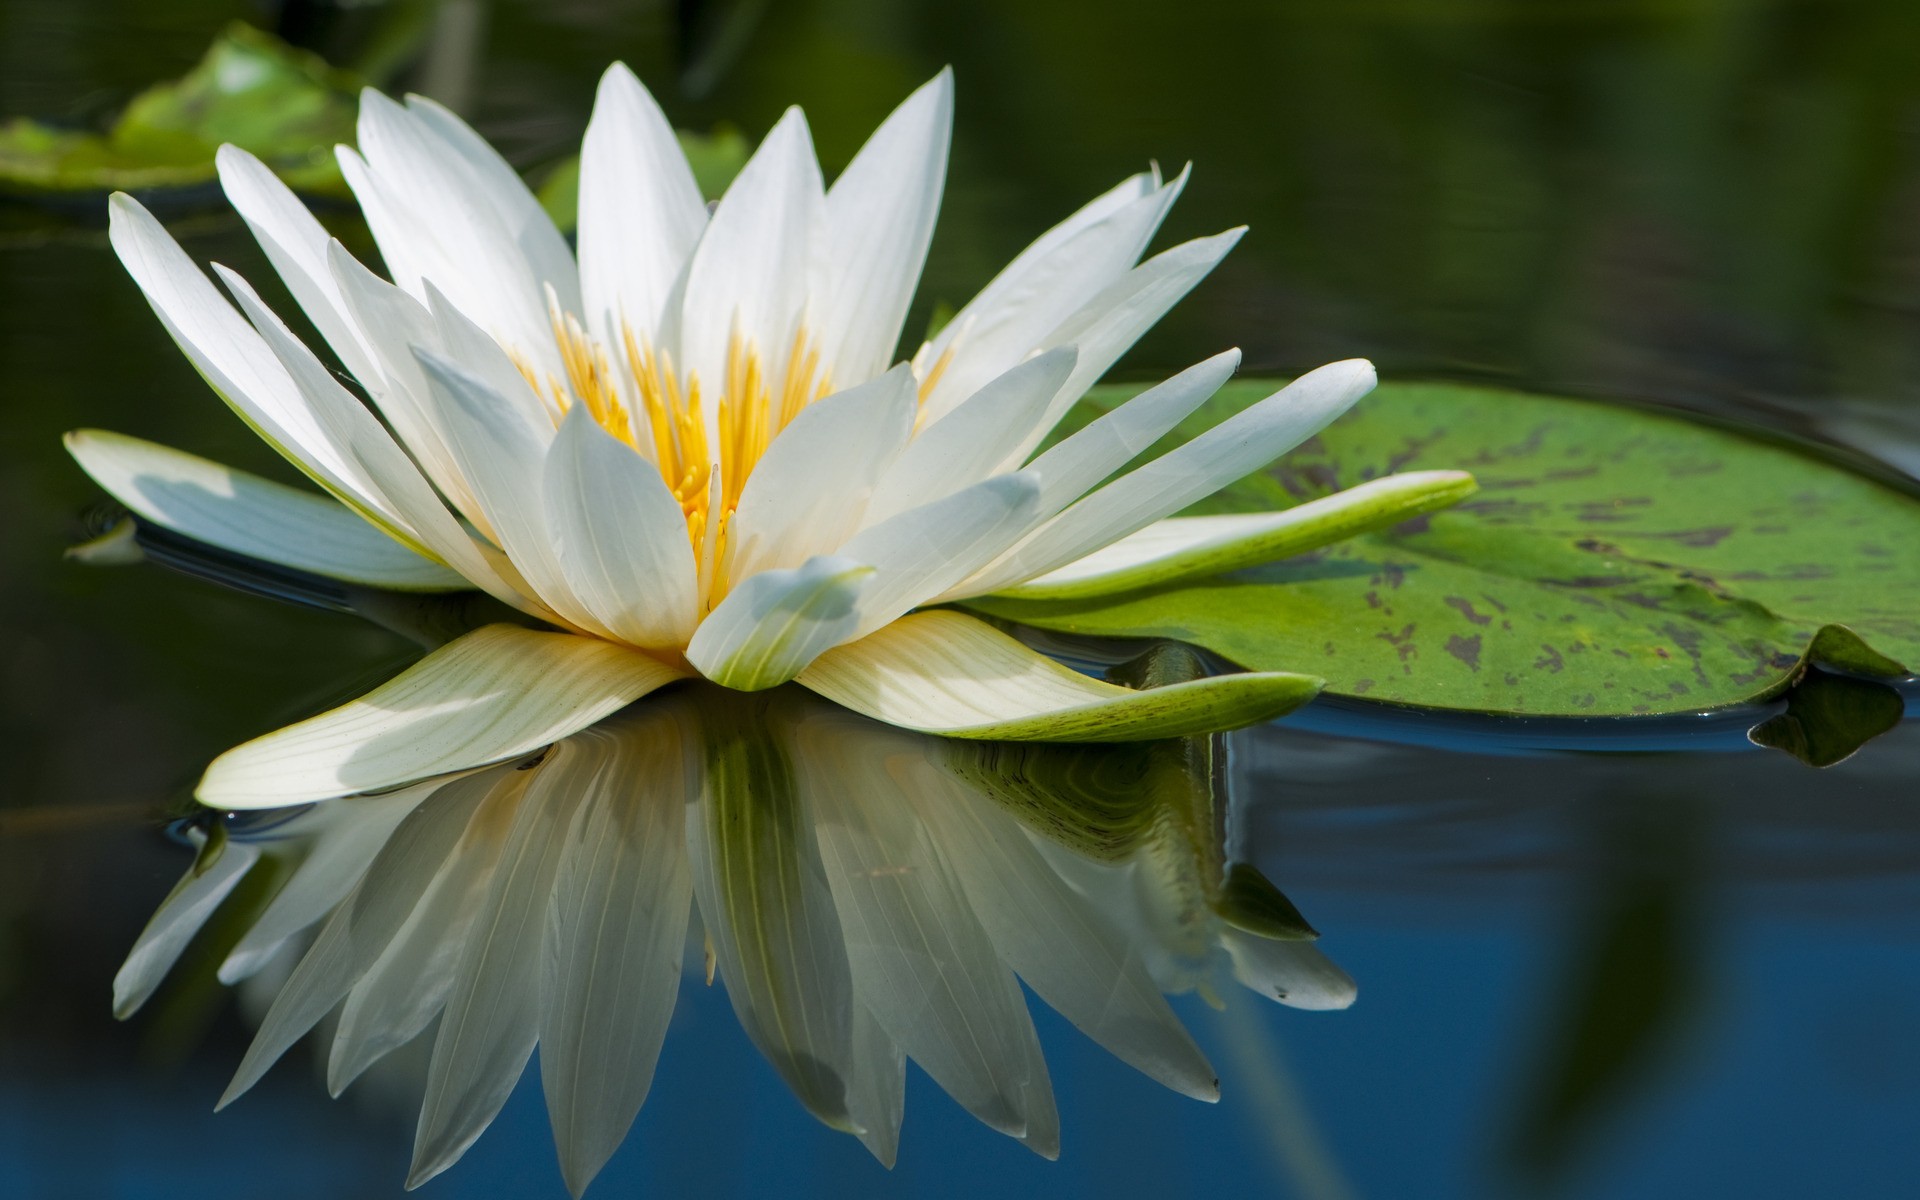 floating, lily pads, reflections, white flowers, water lilies - desktop wallpaper